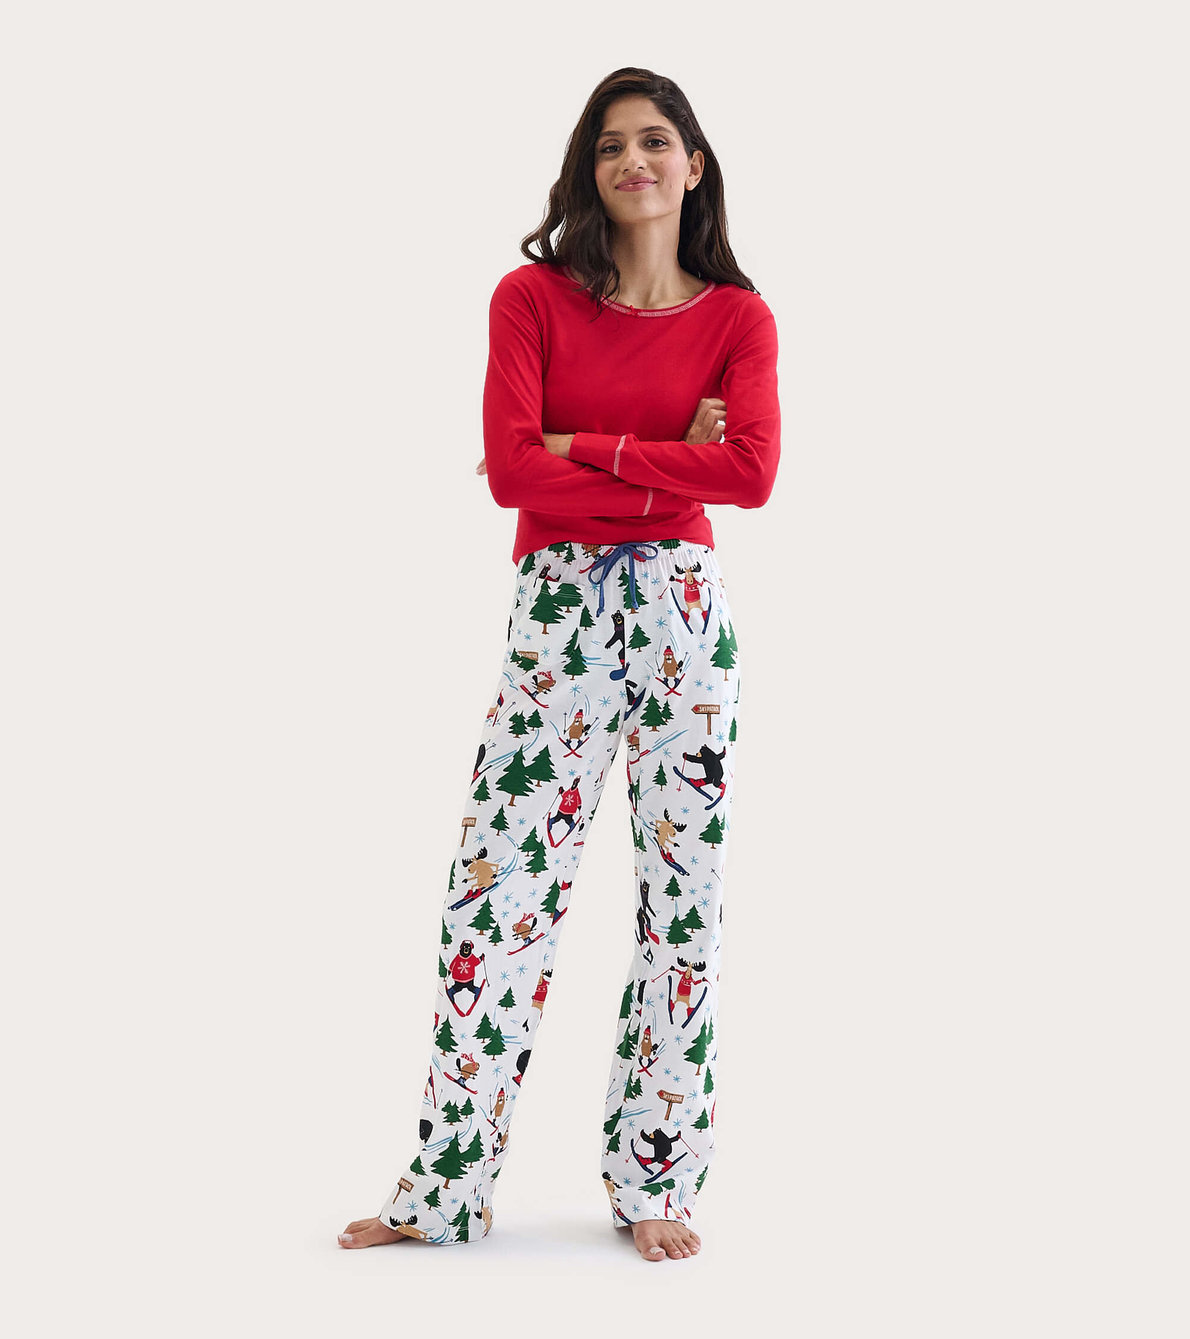 View larger image of Women's Wild About Skiing Jersey Pajama Pants